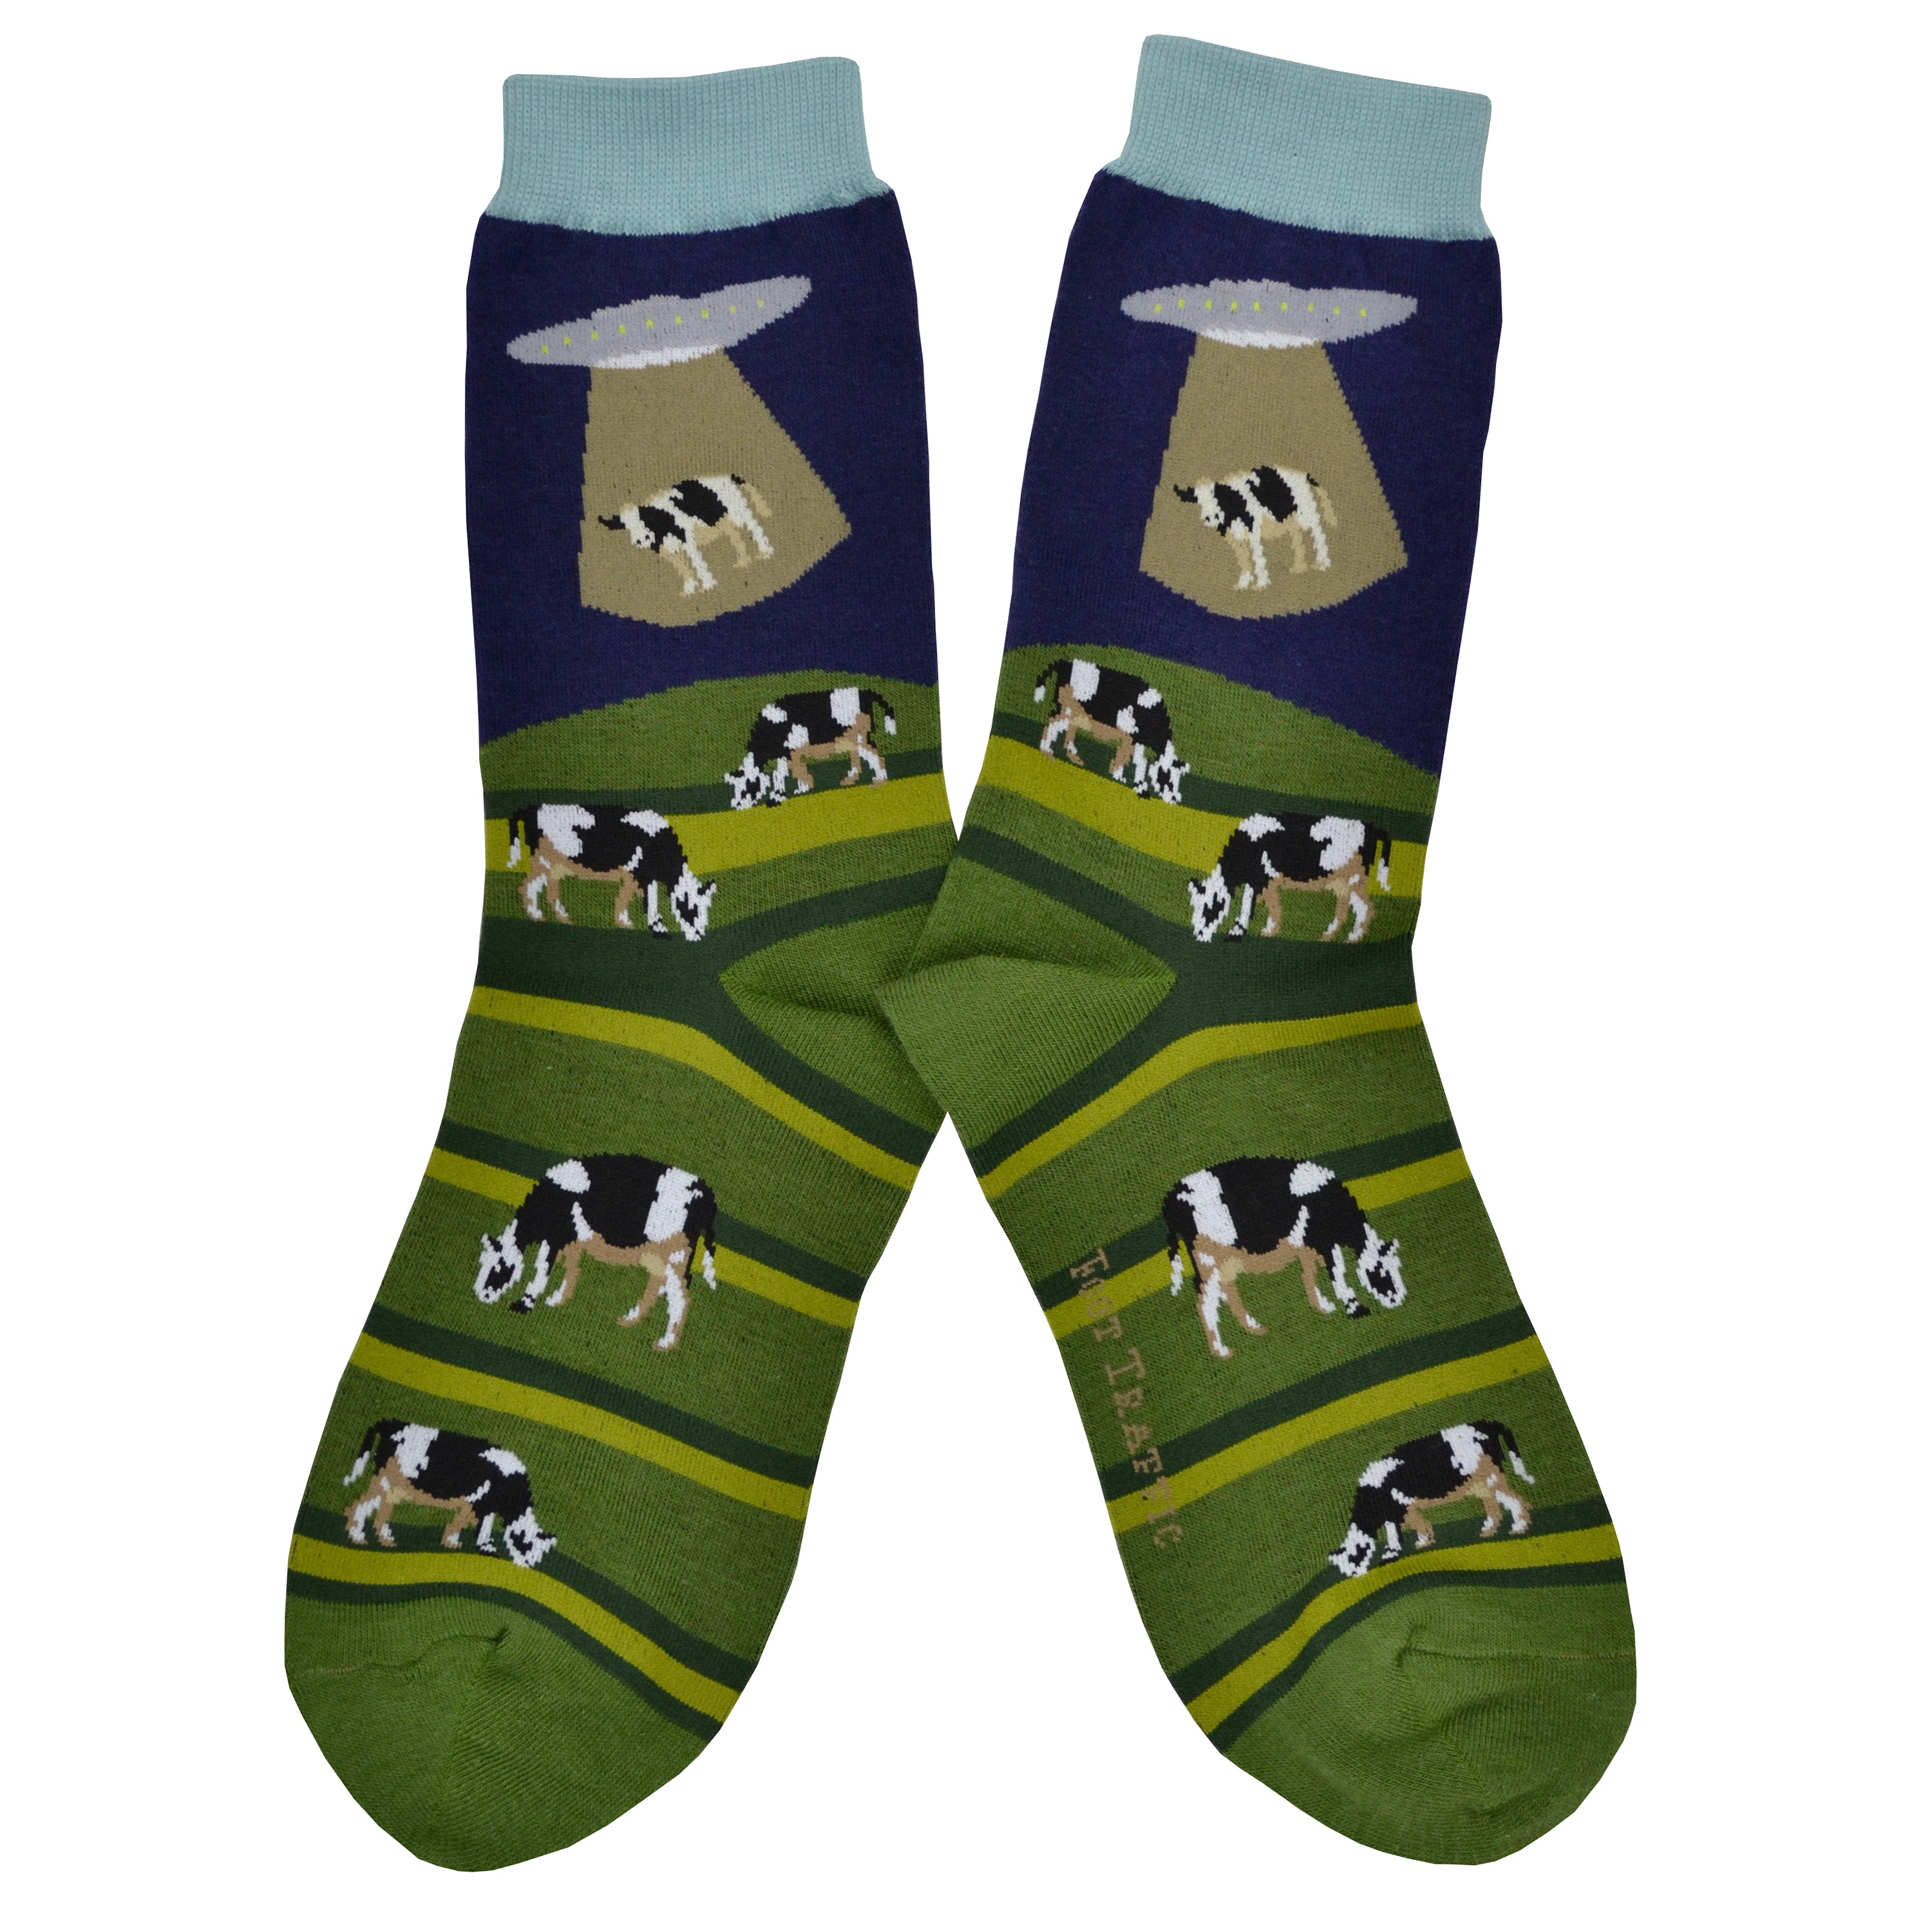 These blue and green cotton women's crew socks with a light blue cuff by the brand Foot Traffic feature an alien spaceship beaming up a cow that was grazing in a field.